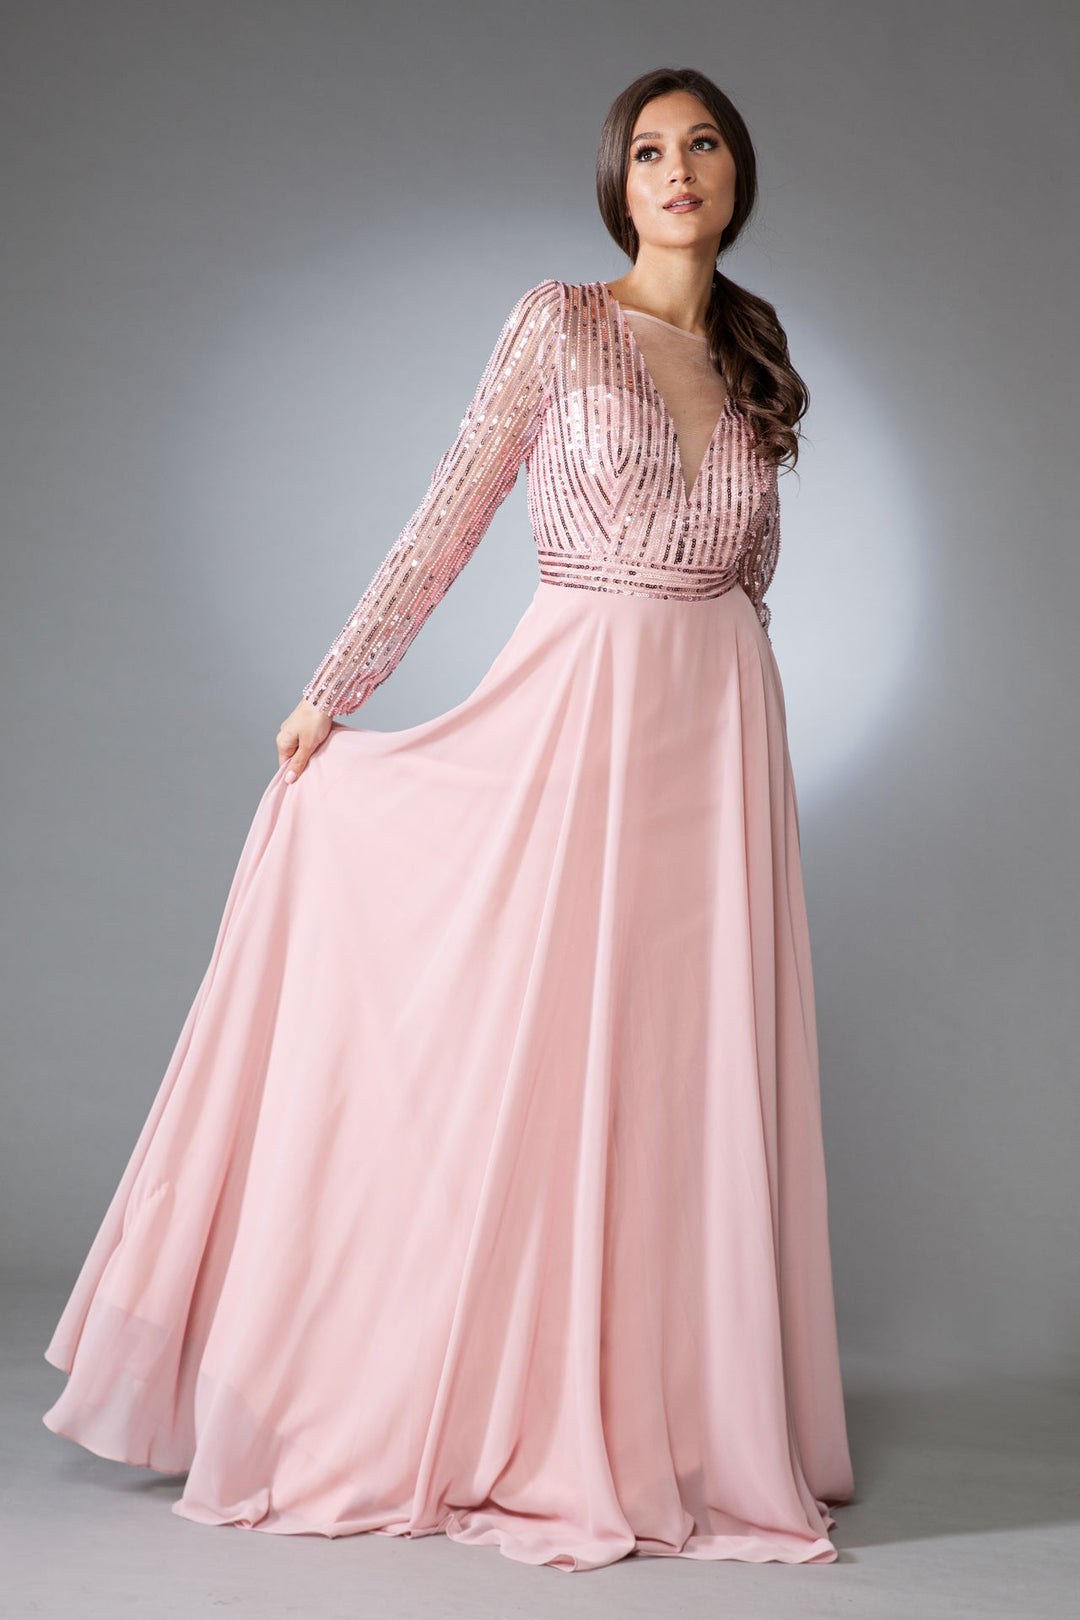 Long Sleeves A-Line Chiffon Skirt Illusion V-Neck Long Mother Of The Bride Dress AC7036-3